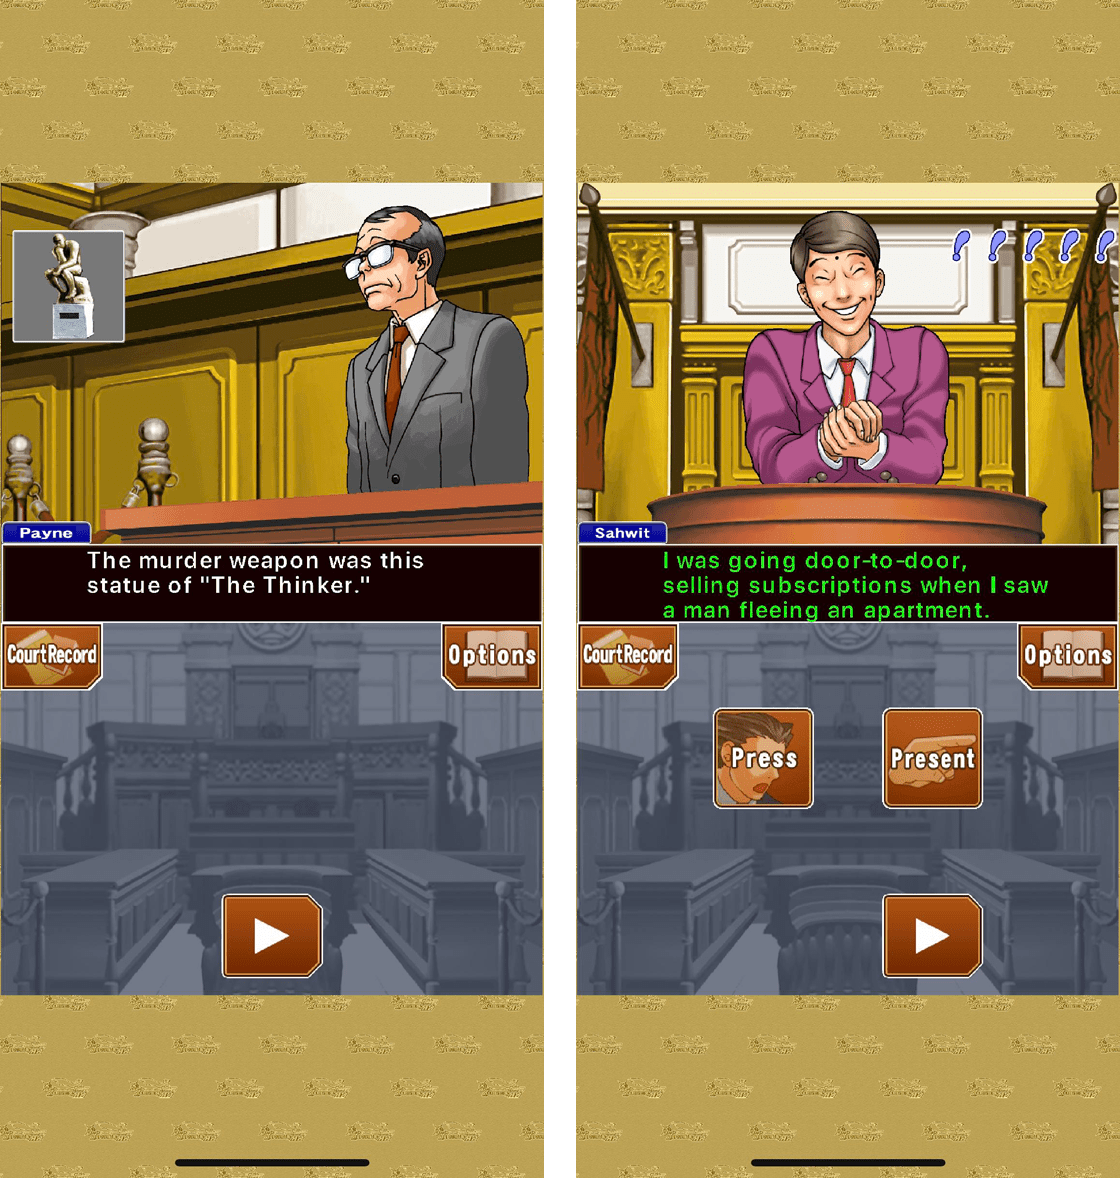 Phoenix Wright: Ace Attorney Trilogy HD due next week on iOS